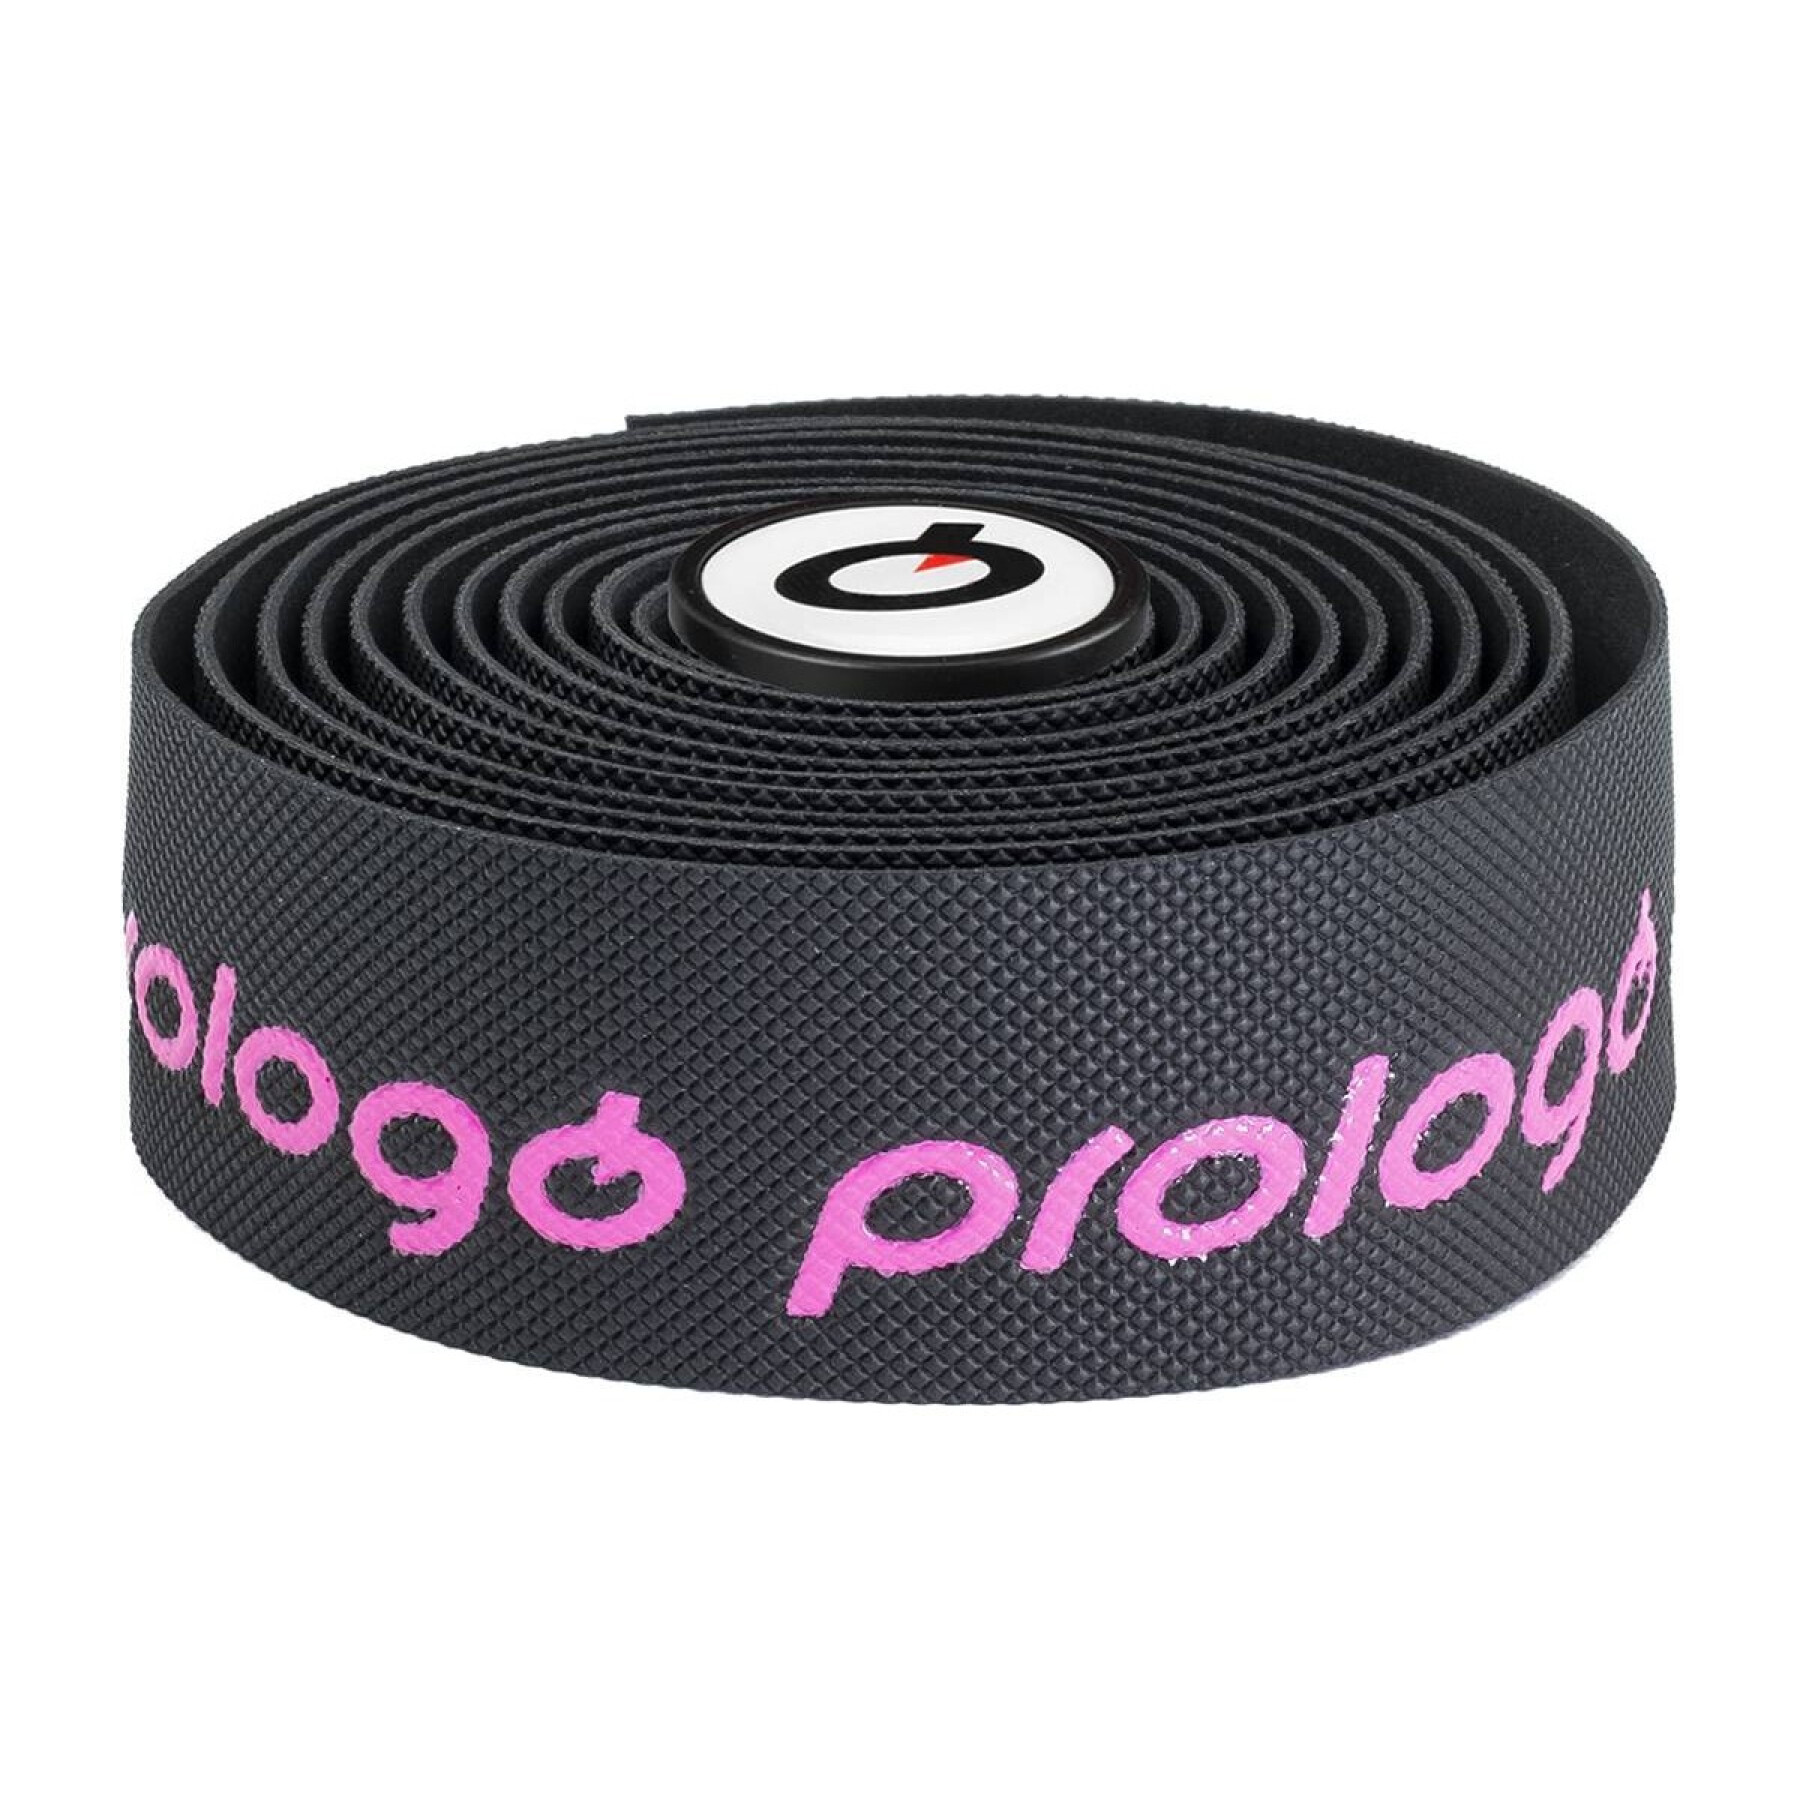 Kleefband Prologo onetouch gel